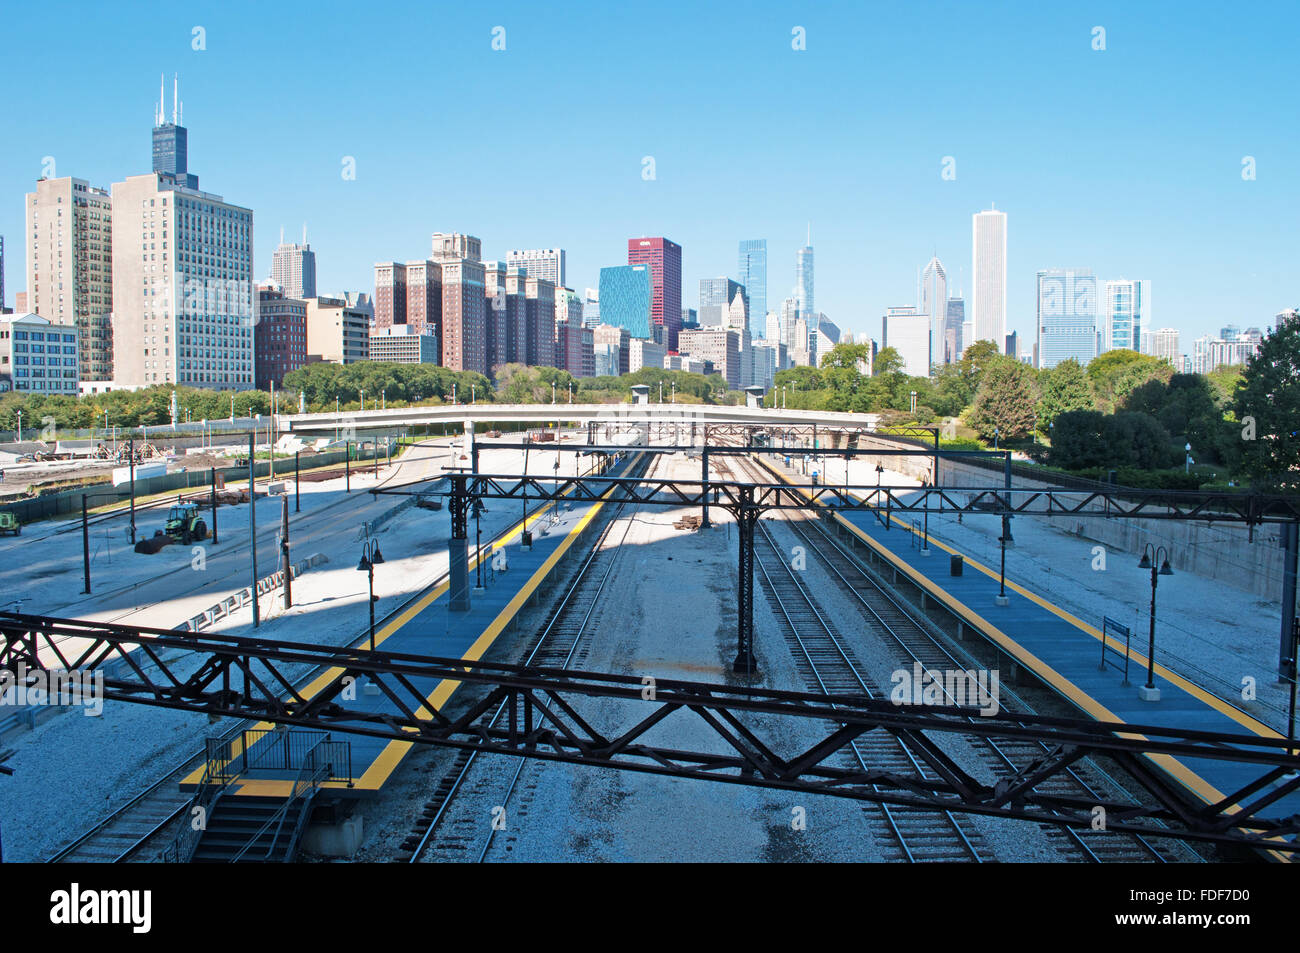 Chicago, Illinois, United States of America: skyline seen from railroad tracks Stock Photo